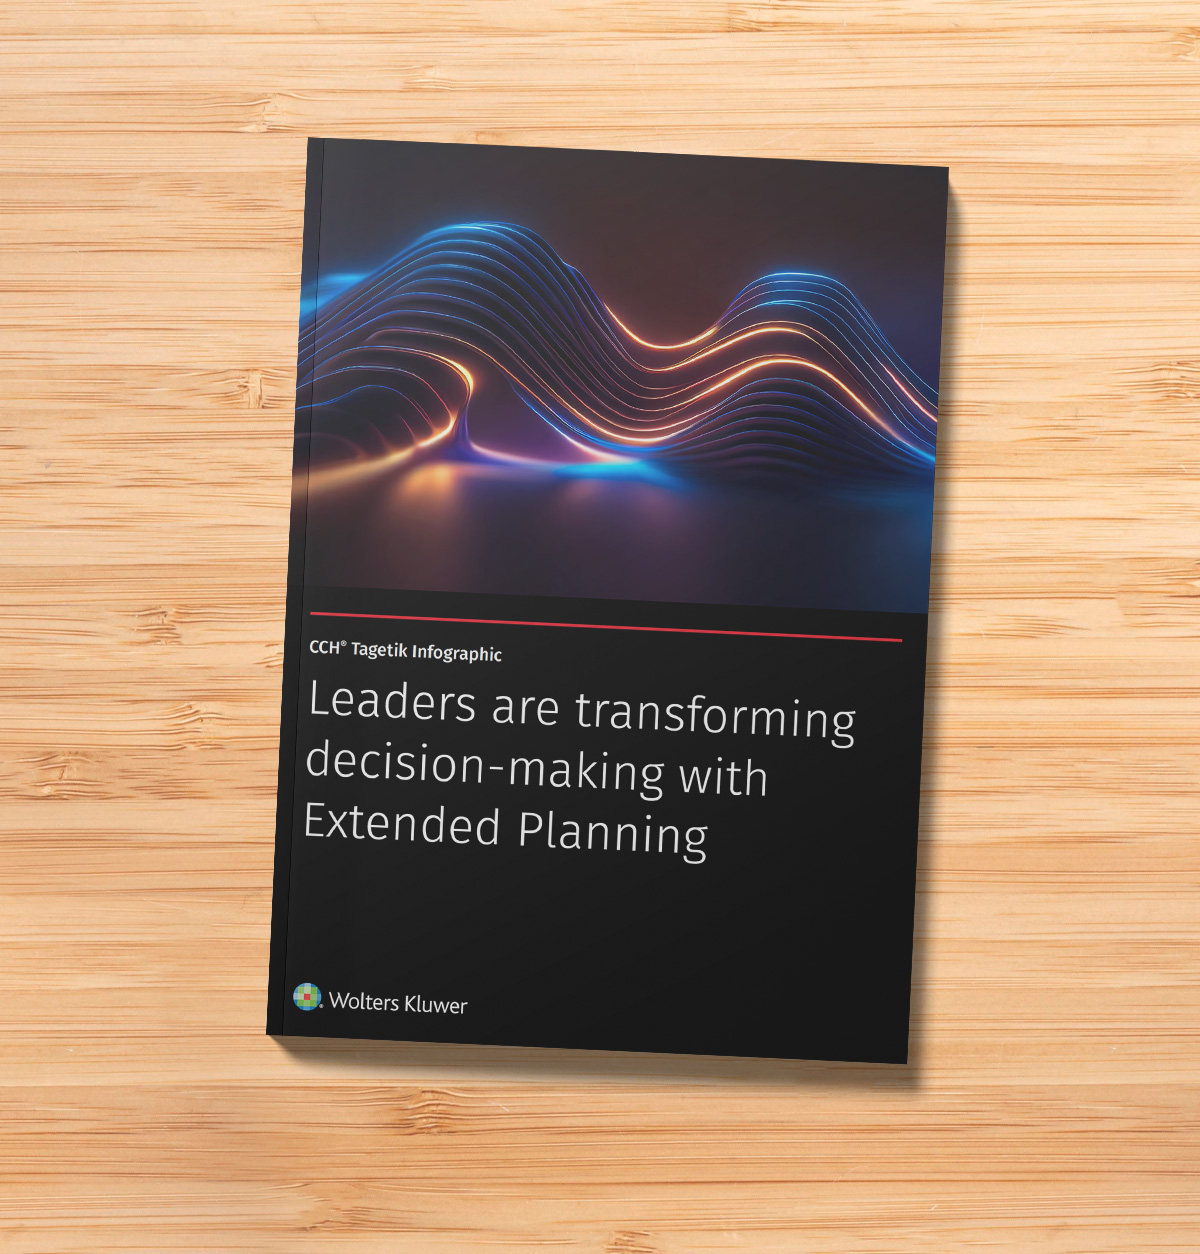 Leaders are transforming decision making with Extended Planning